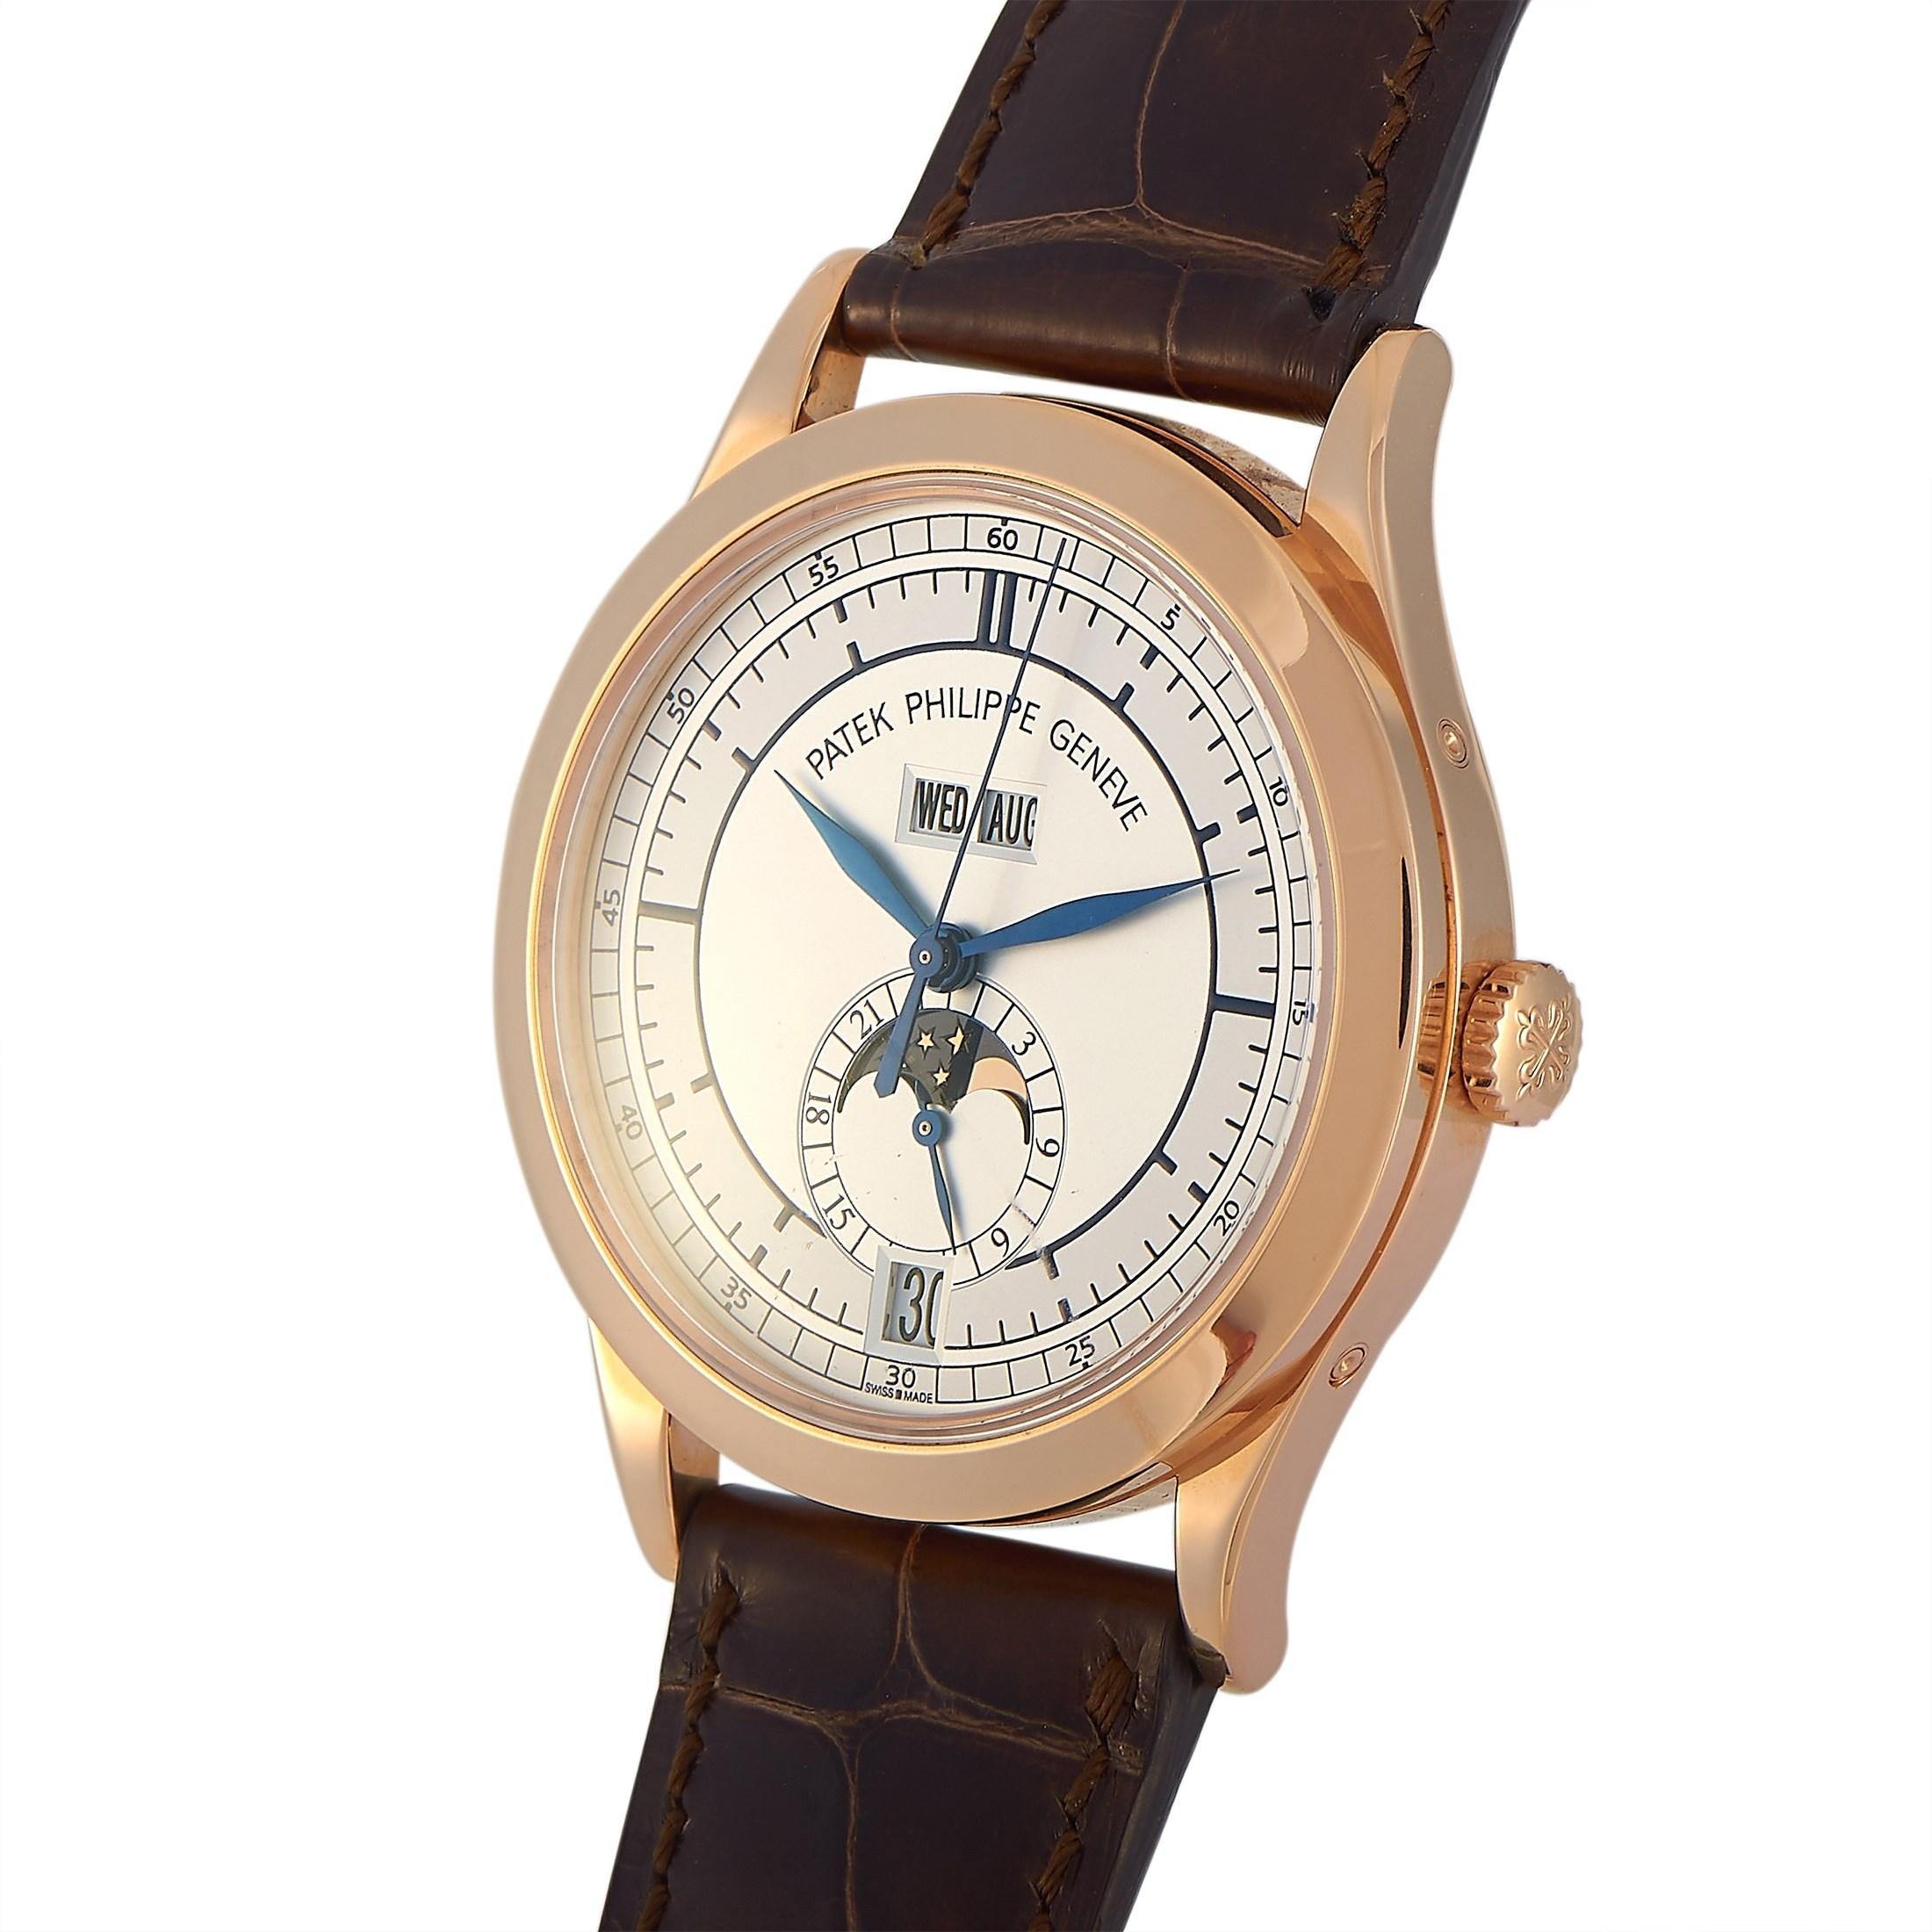 This luxury watch is defined by its elegant simplicity. On its two-toned silvered dial are blue painted index hours, minutes, and seconds markers. Matching gunmetal blue hands point to time. Positioned beneath 12 o'clock is the annual calendar